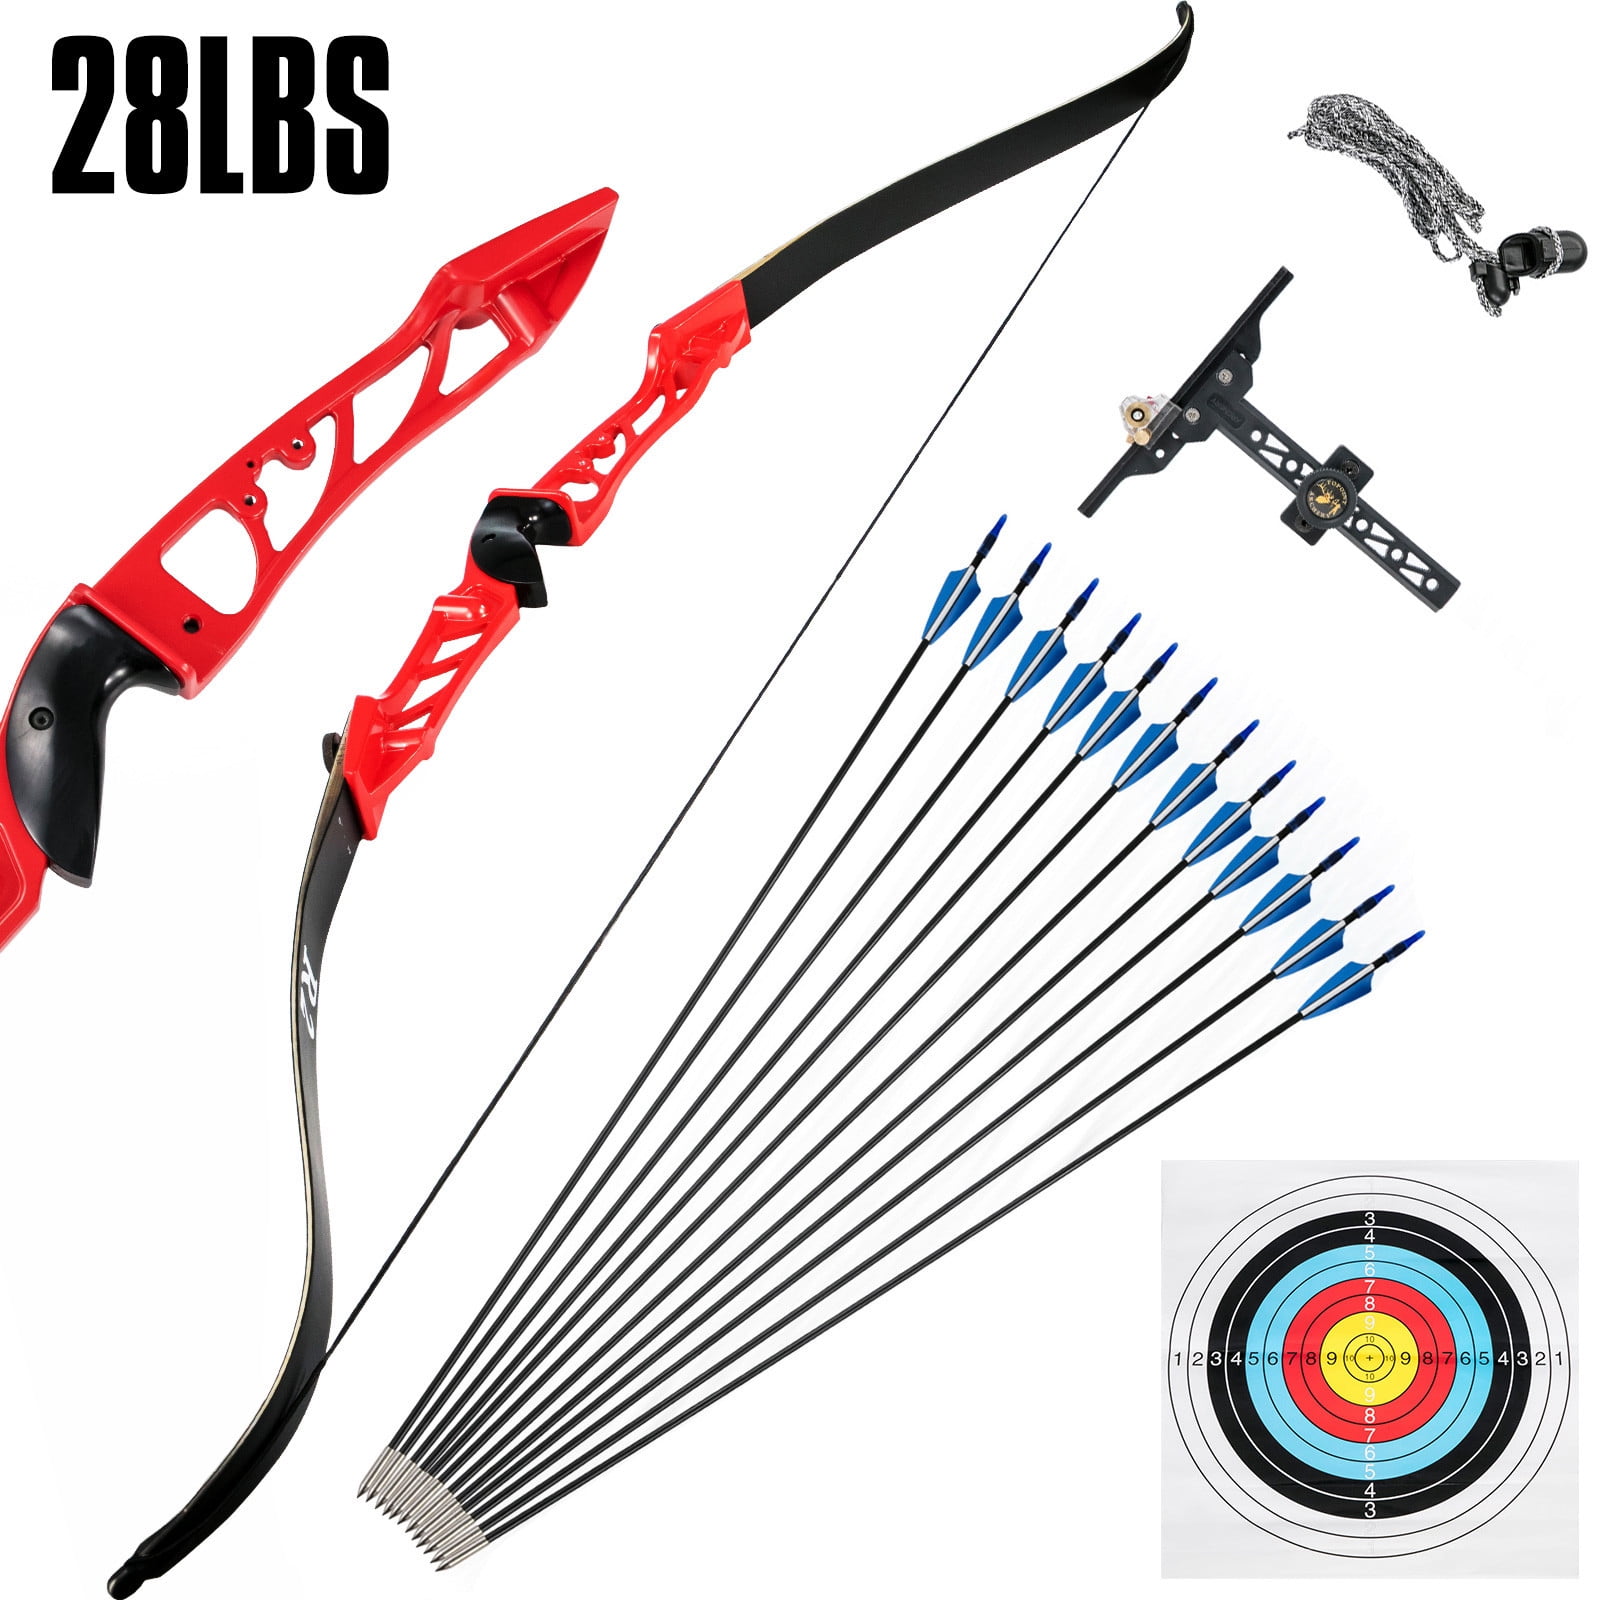 Youth Archer Beginner Target Hunting Shooting Details about   60" Recurve Bows ILF Limbs 20lbs 